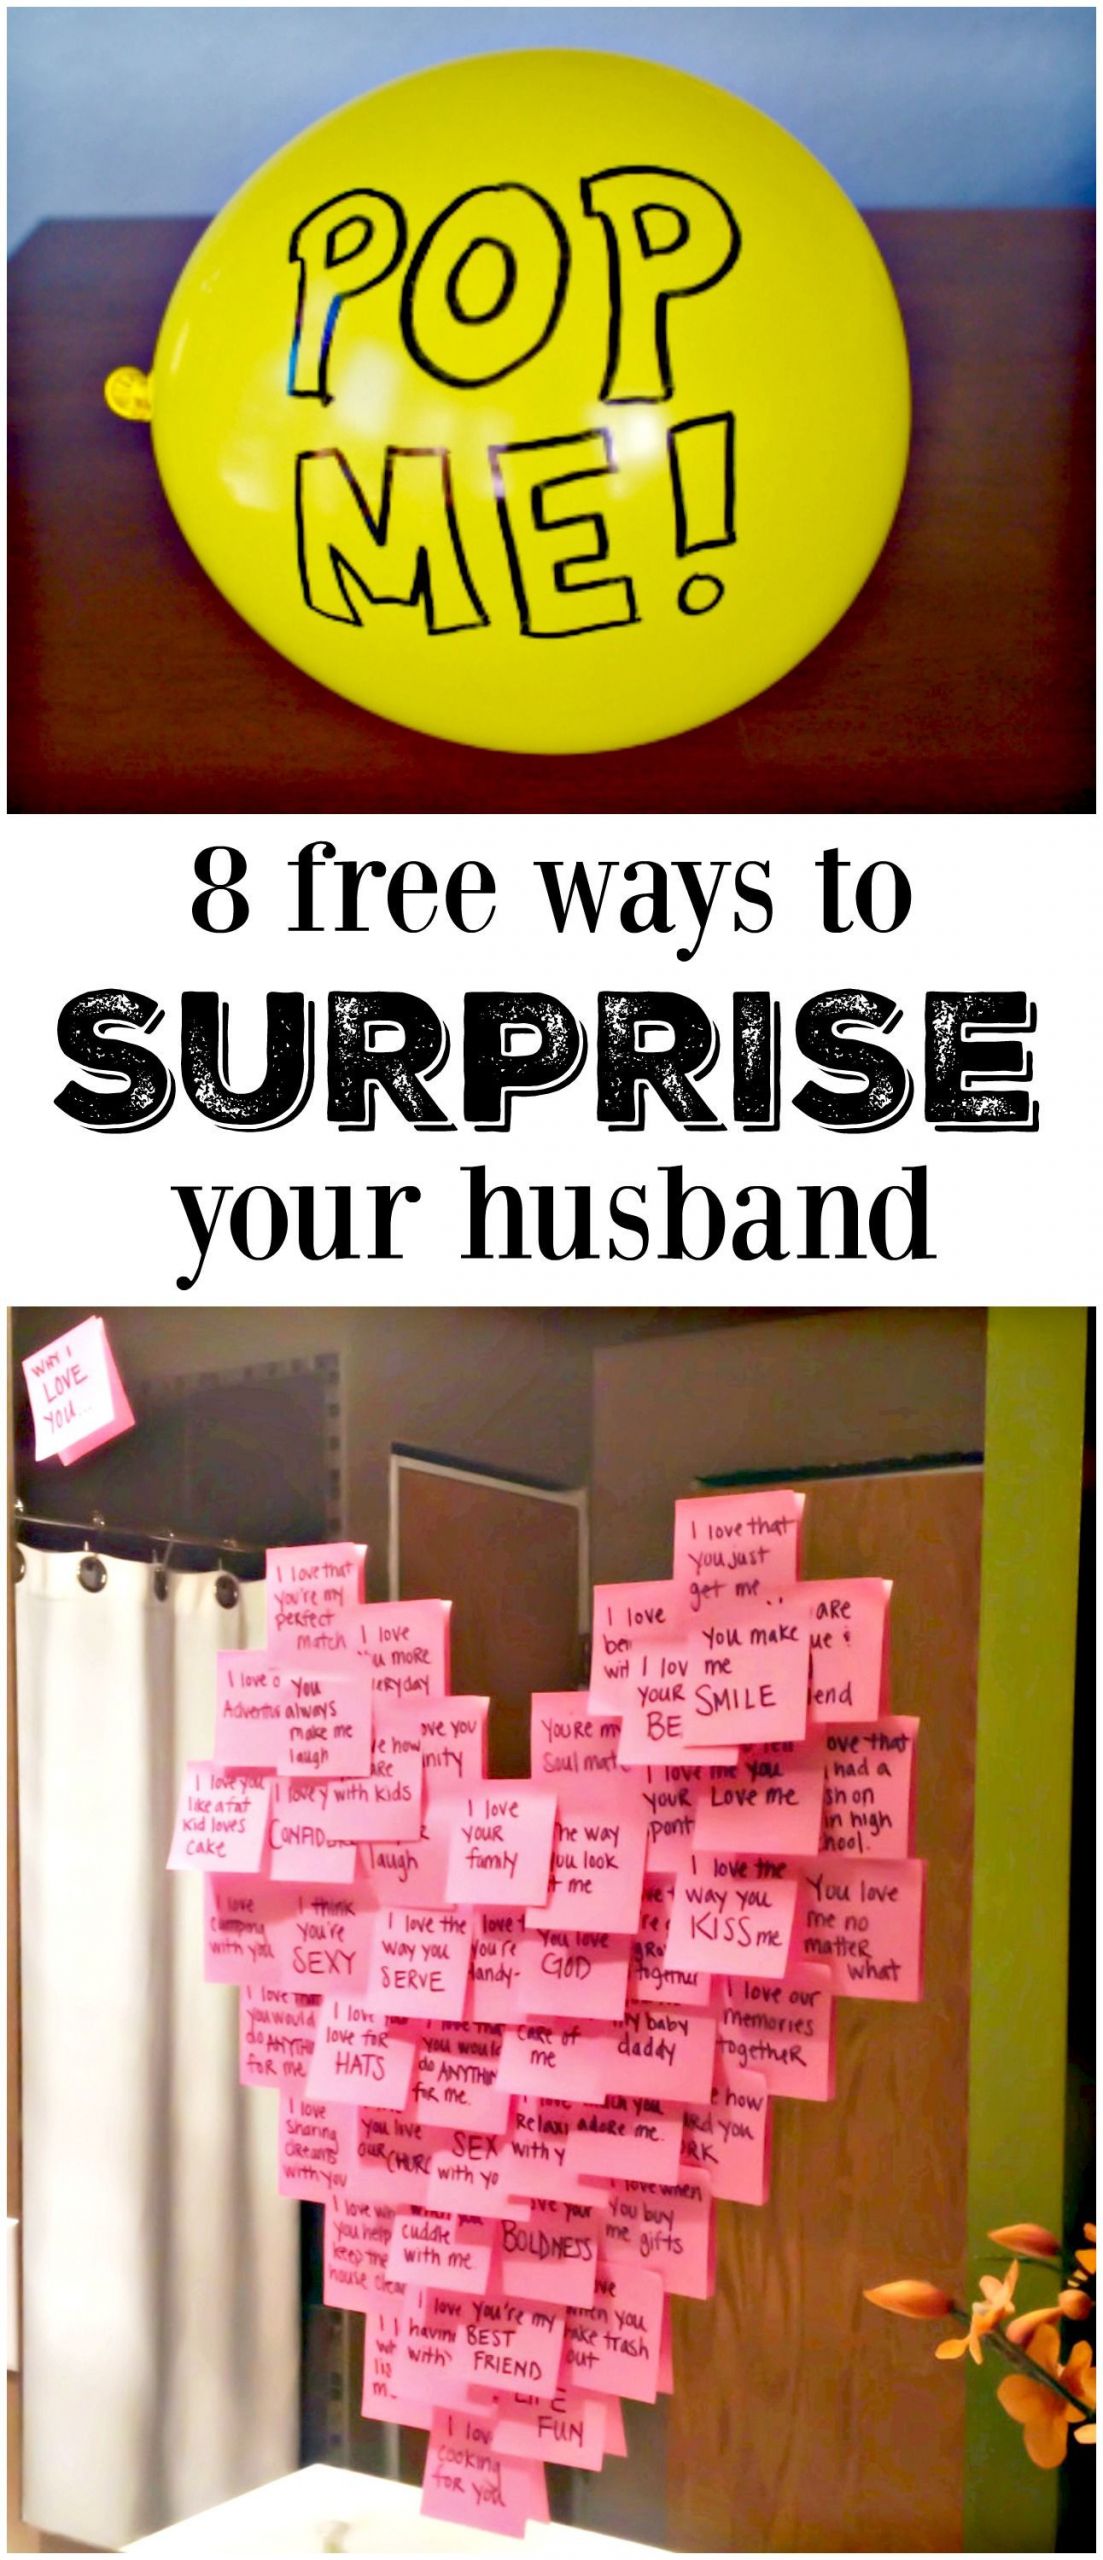 DIY Valentine Gifts For Husband
 8 Meaningful Ways to Make His Day DIY Ideas